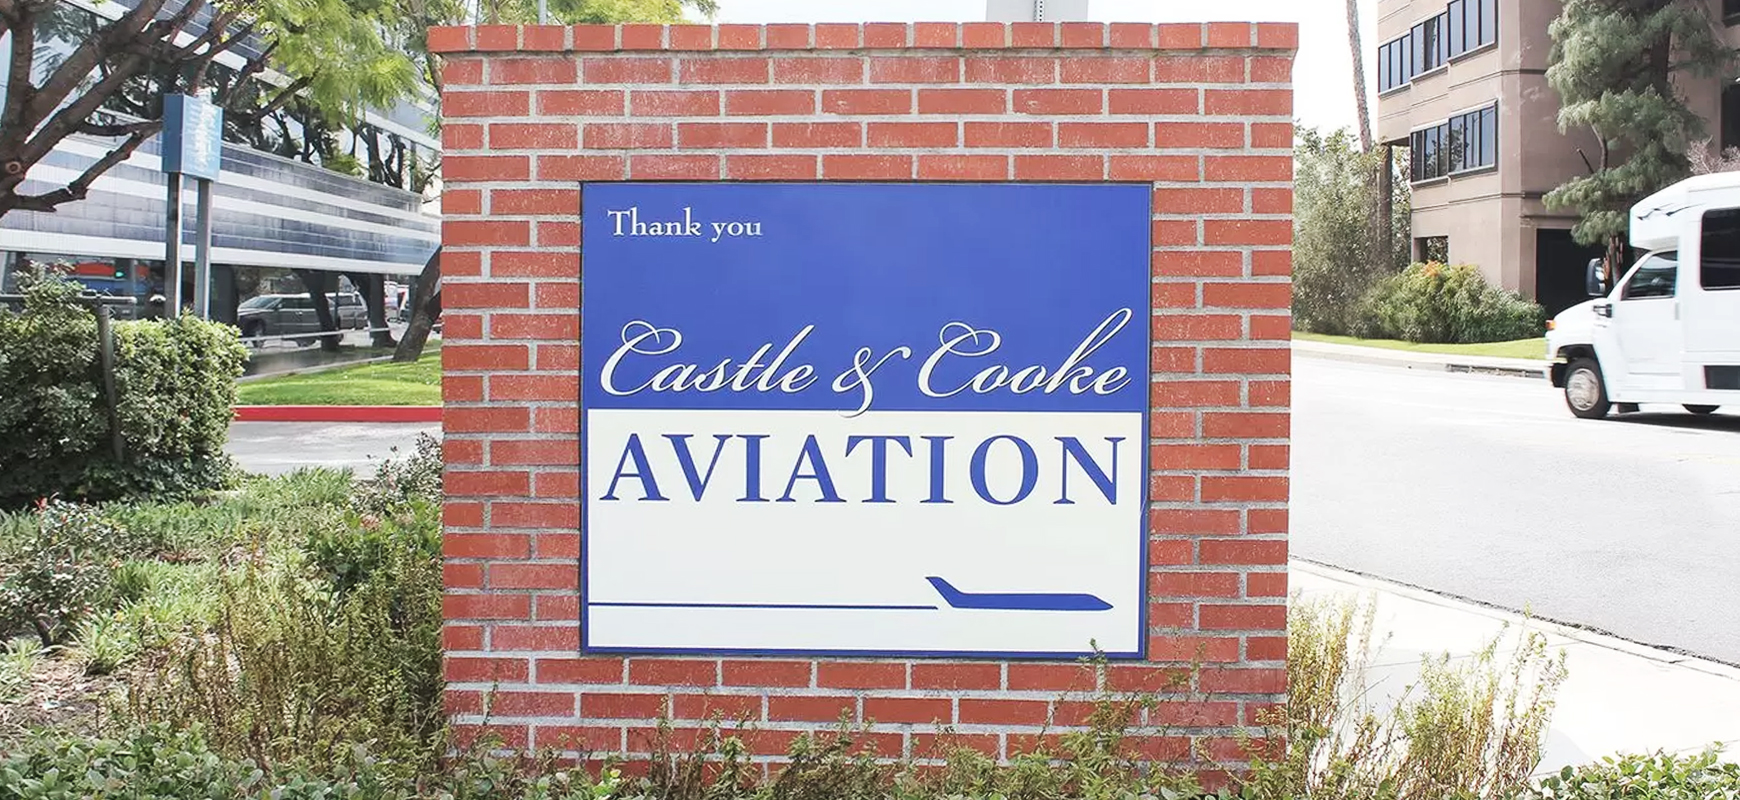 Castle & Cooke Aviation stone monument sign in a pylon style made of PVC